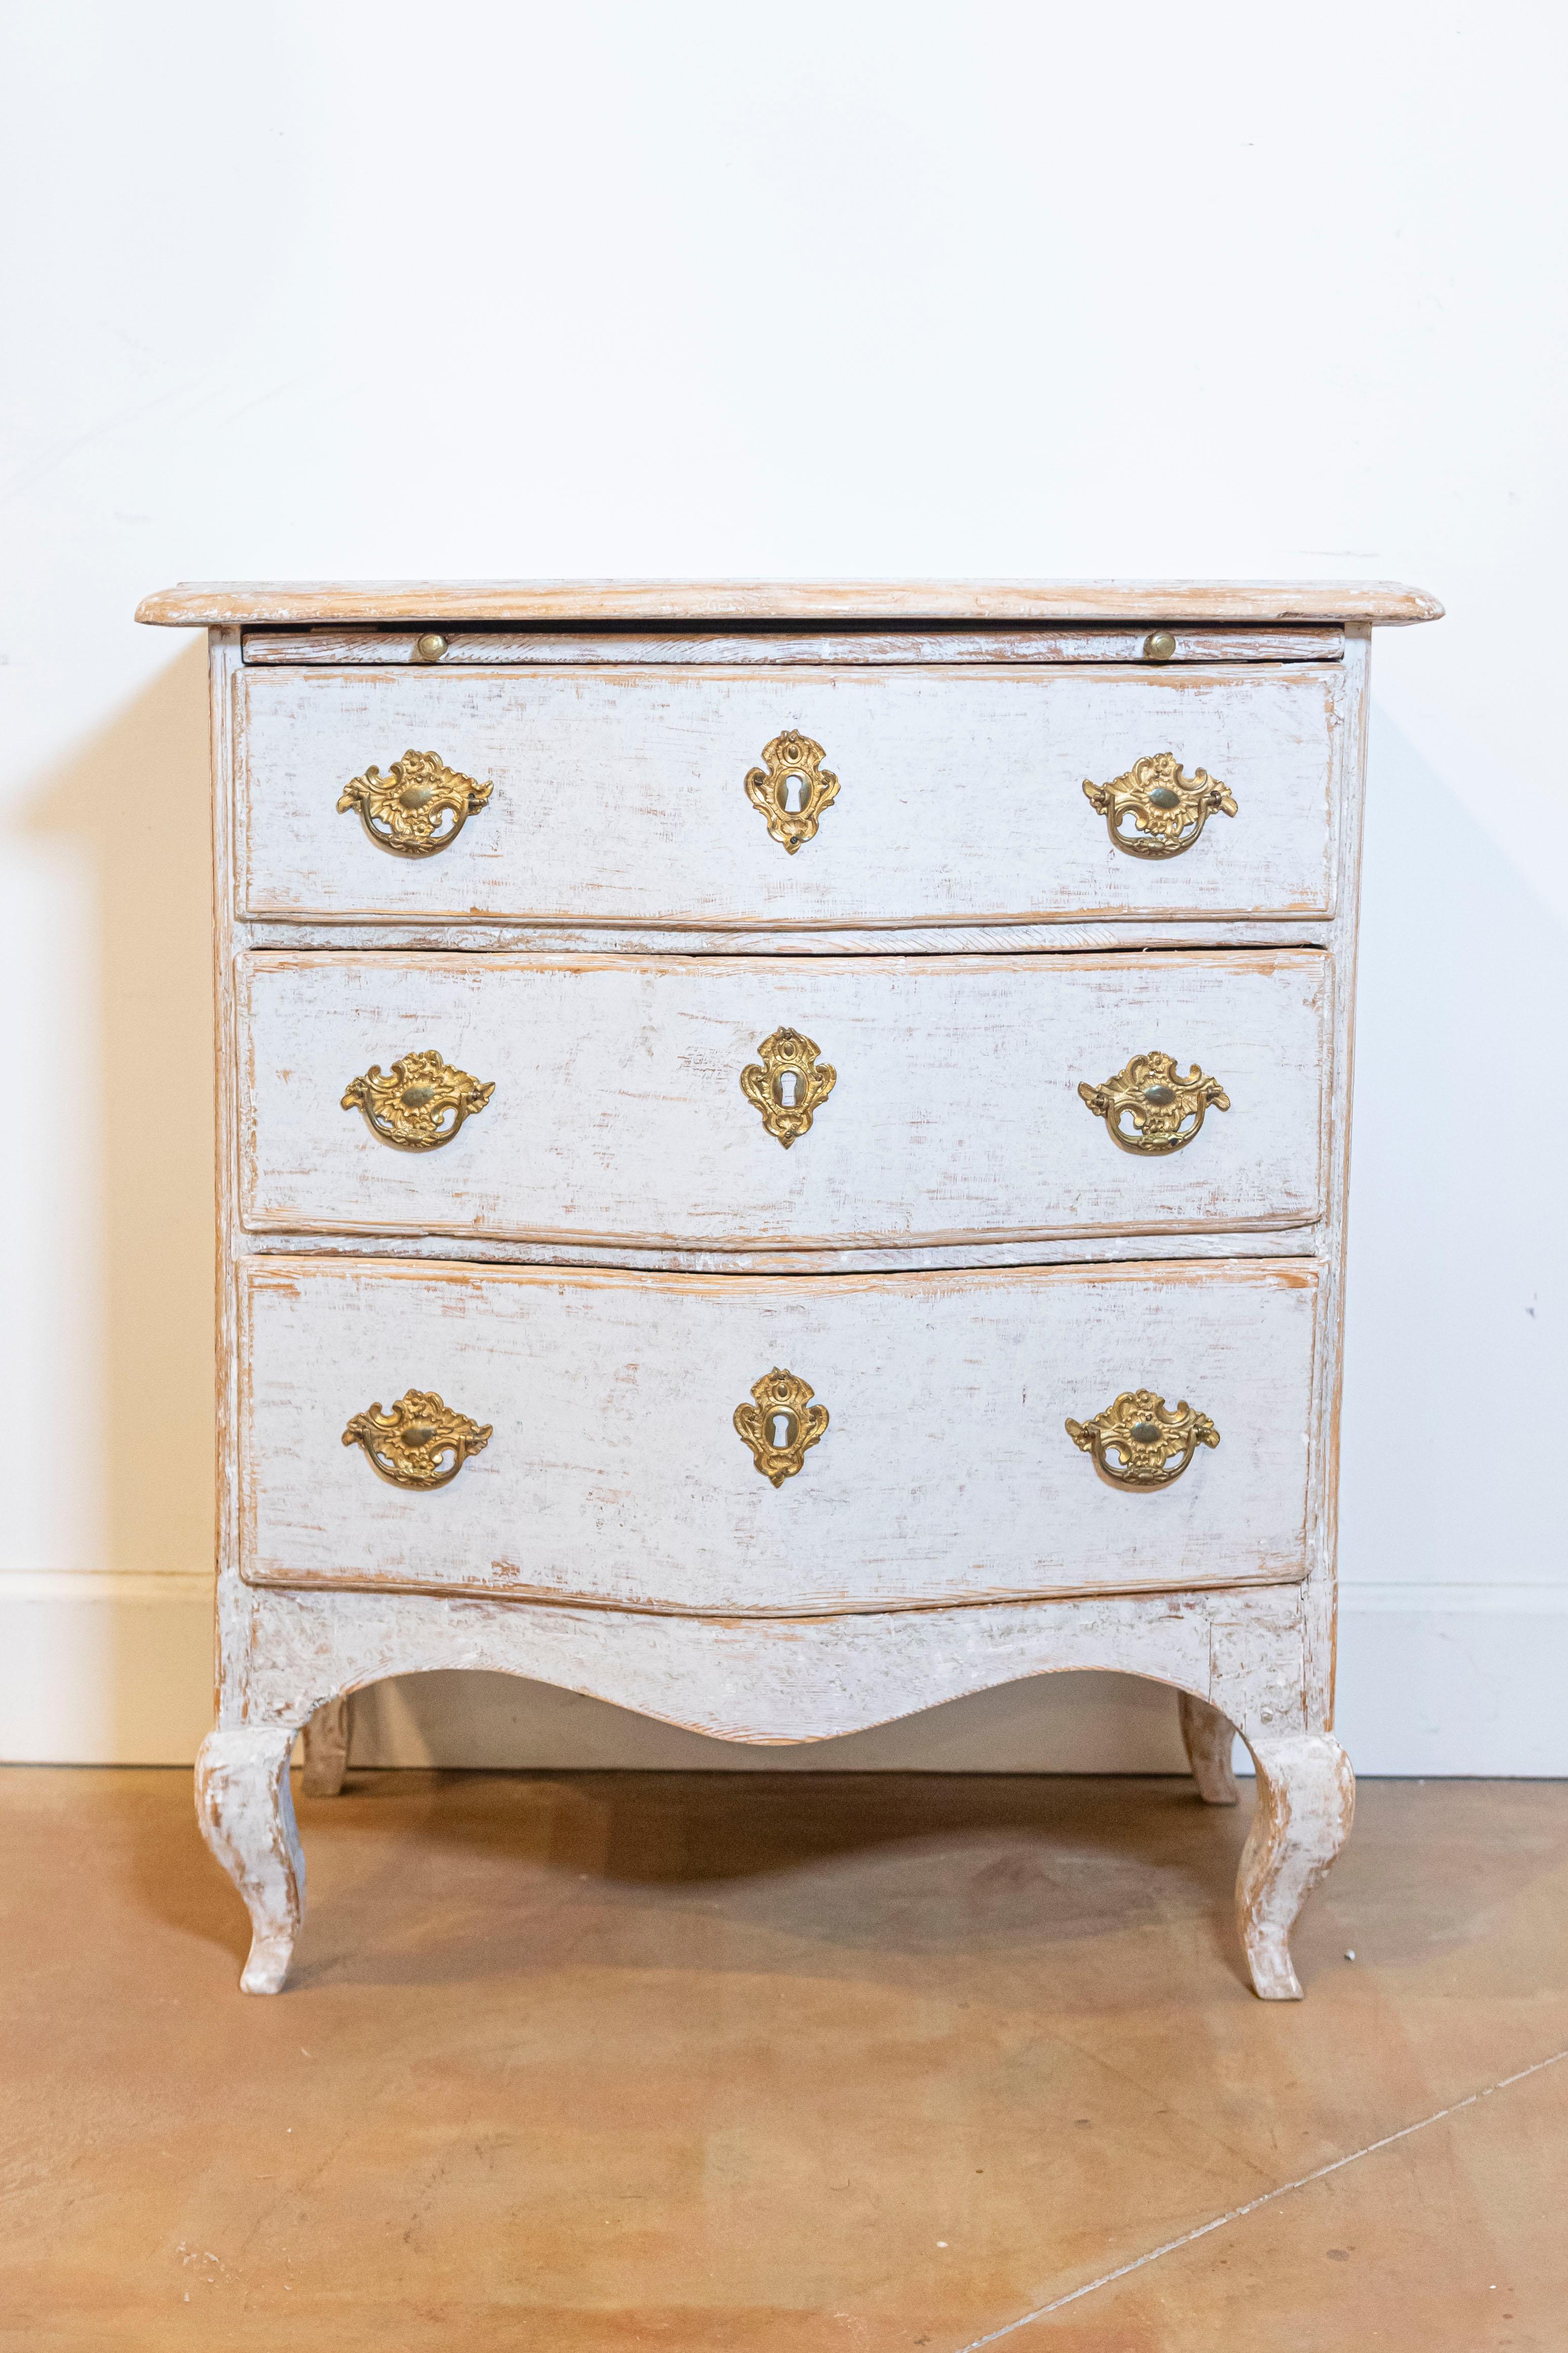 A Swedish Rococo period neutral light grey painted chest from circa 1760 with three drawers topped by a discreet pull-out, serpentine front, cabriole legs and ormolu hardware. Emanating the grace and nuanced elegance of the Swedish Rococo period,